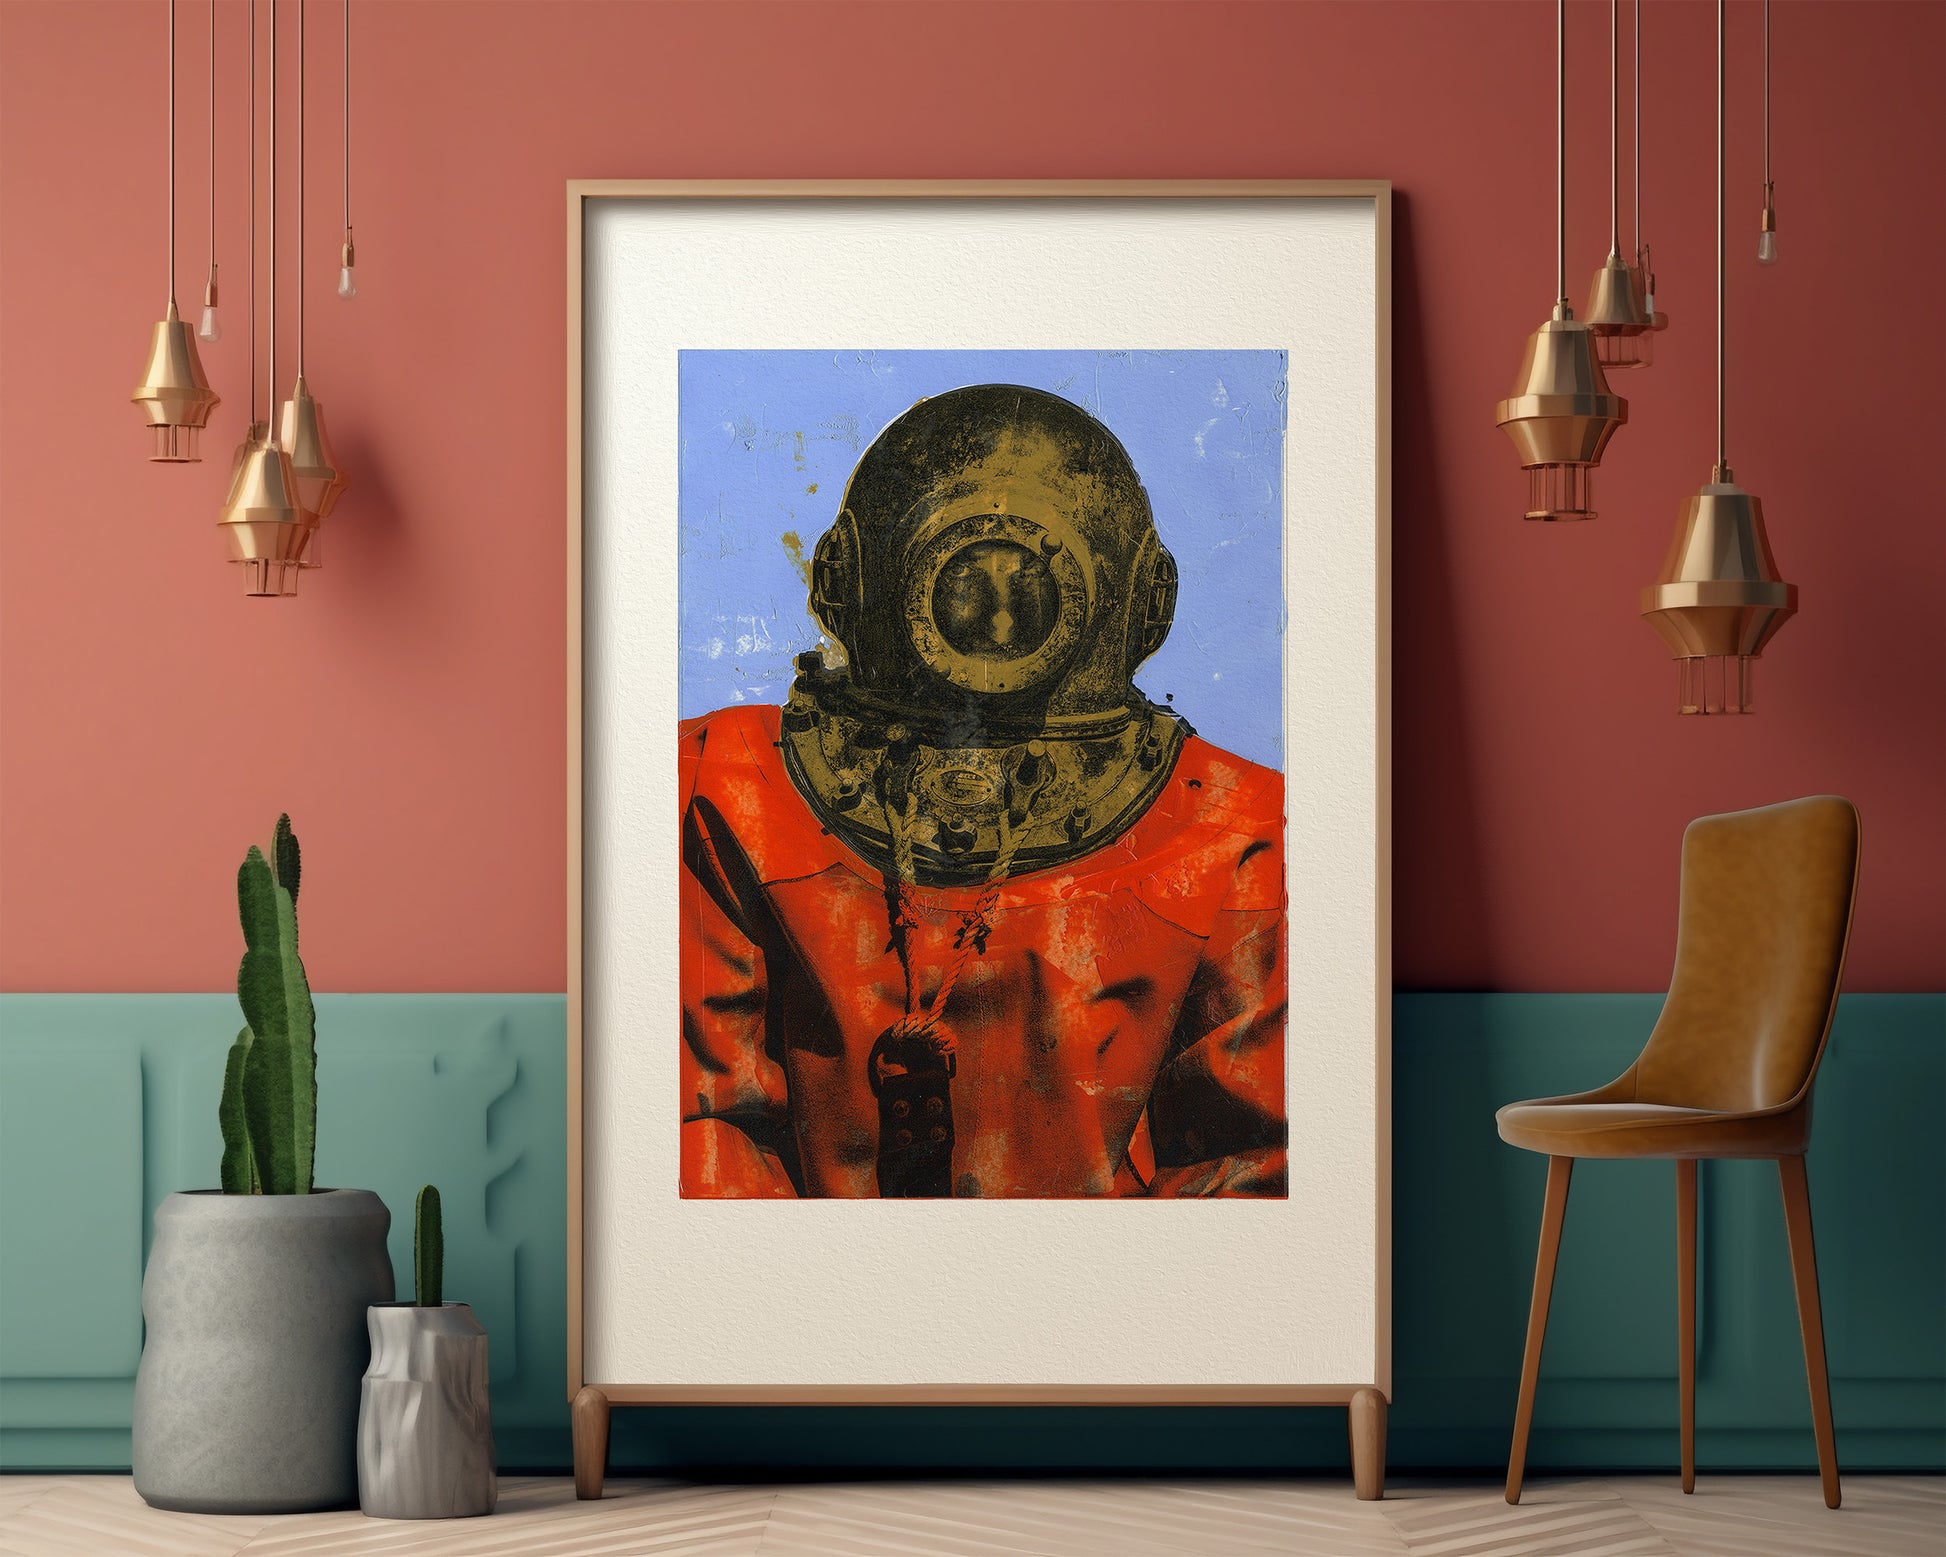 Painting Pop Art Wall Art from Greece | Duotone sponge diver from Kalymnos island, by George Tatakis - inside an eclectic room